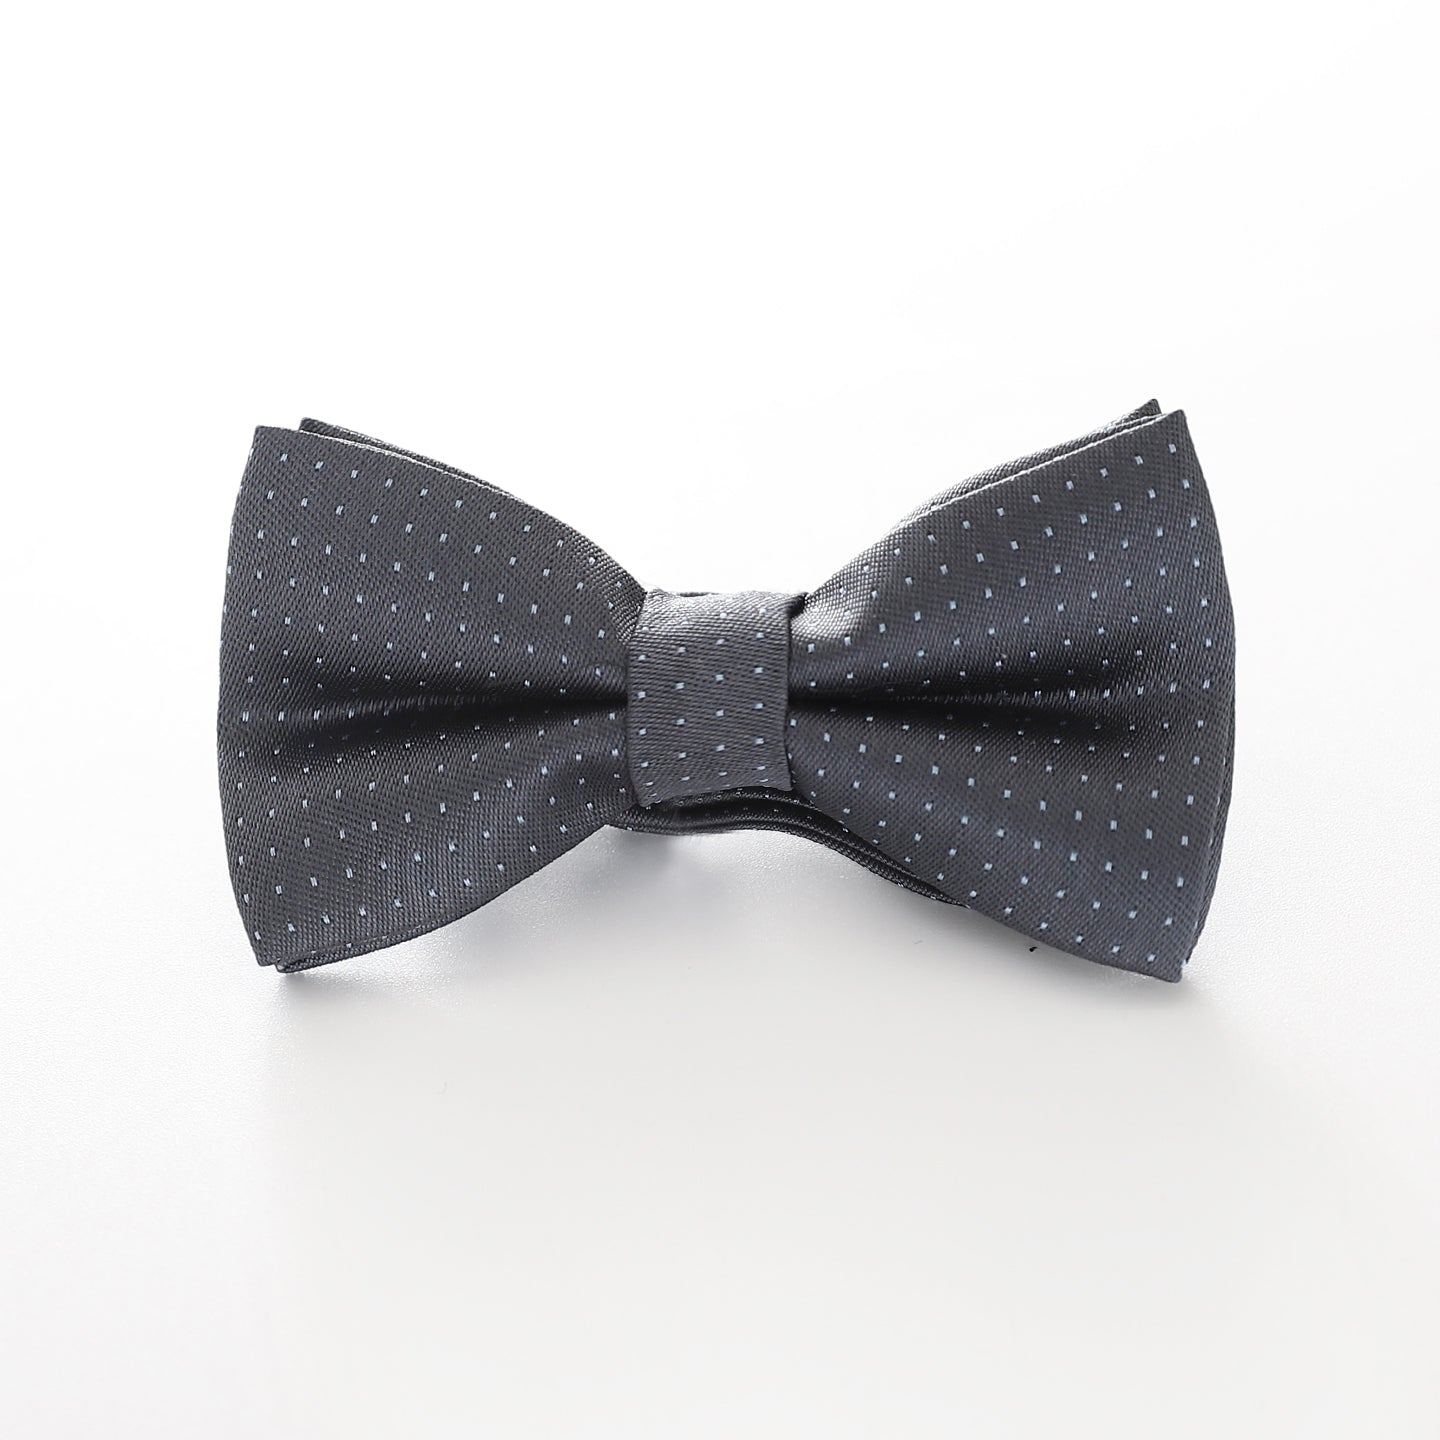 Boys' Patterned Bowtie - Grey and White Spot